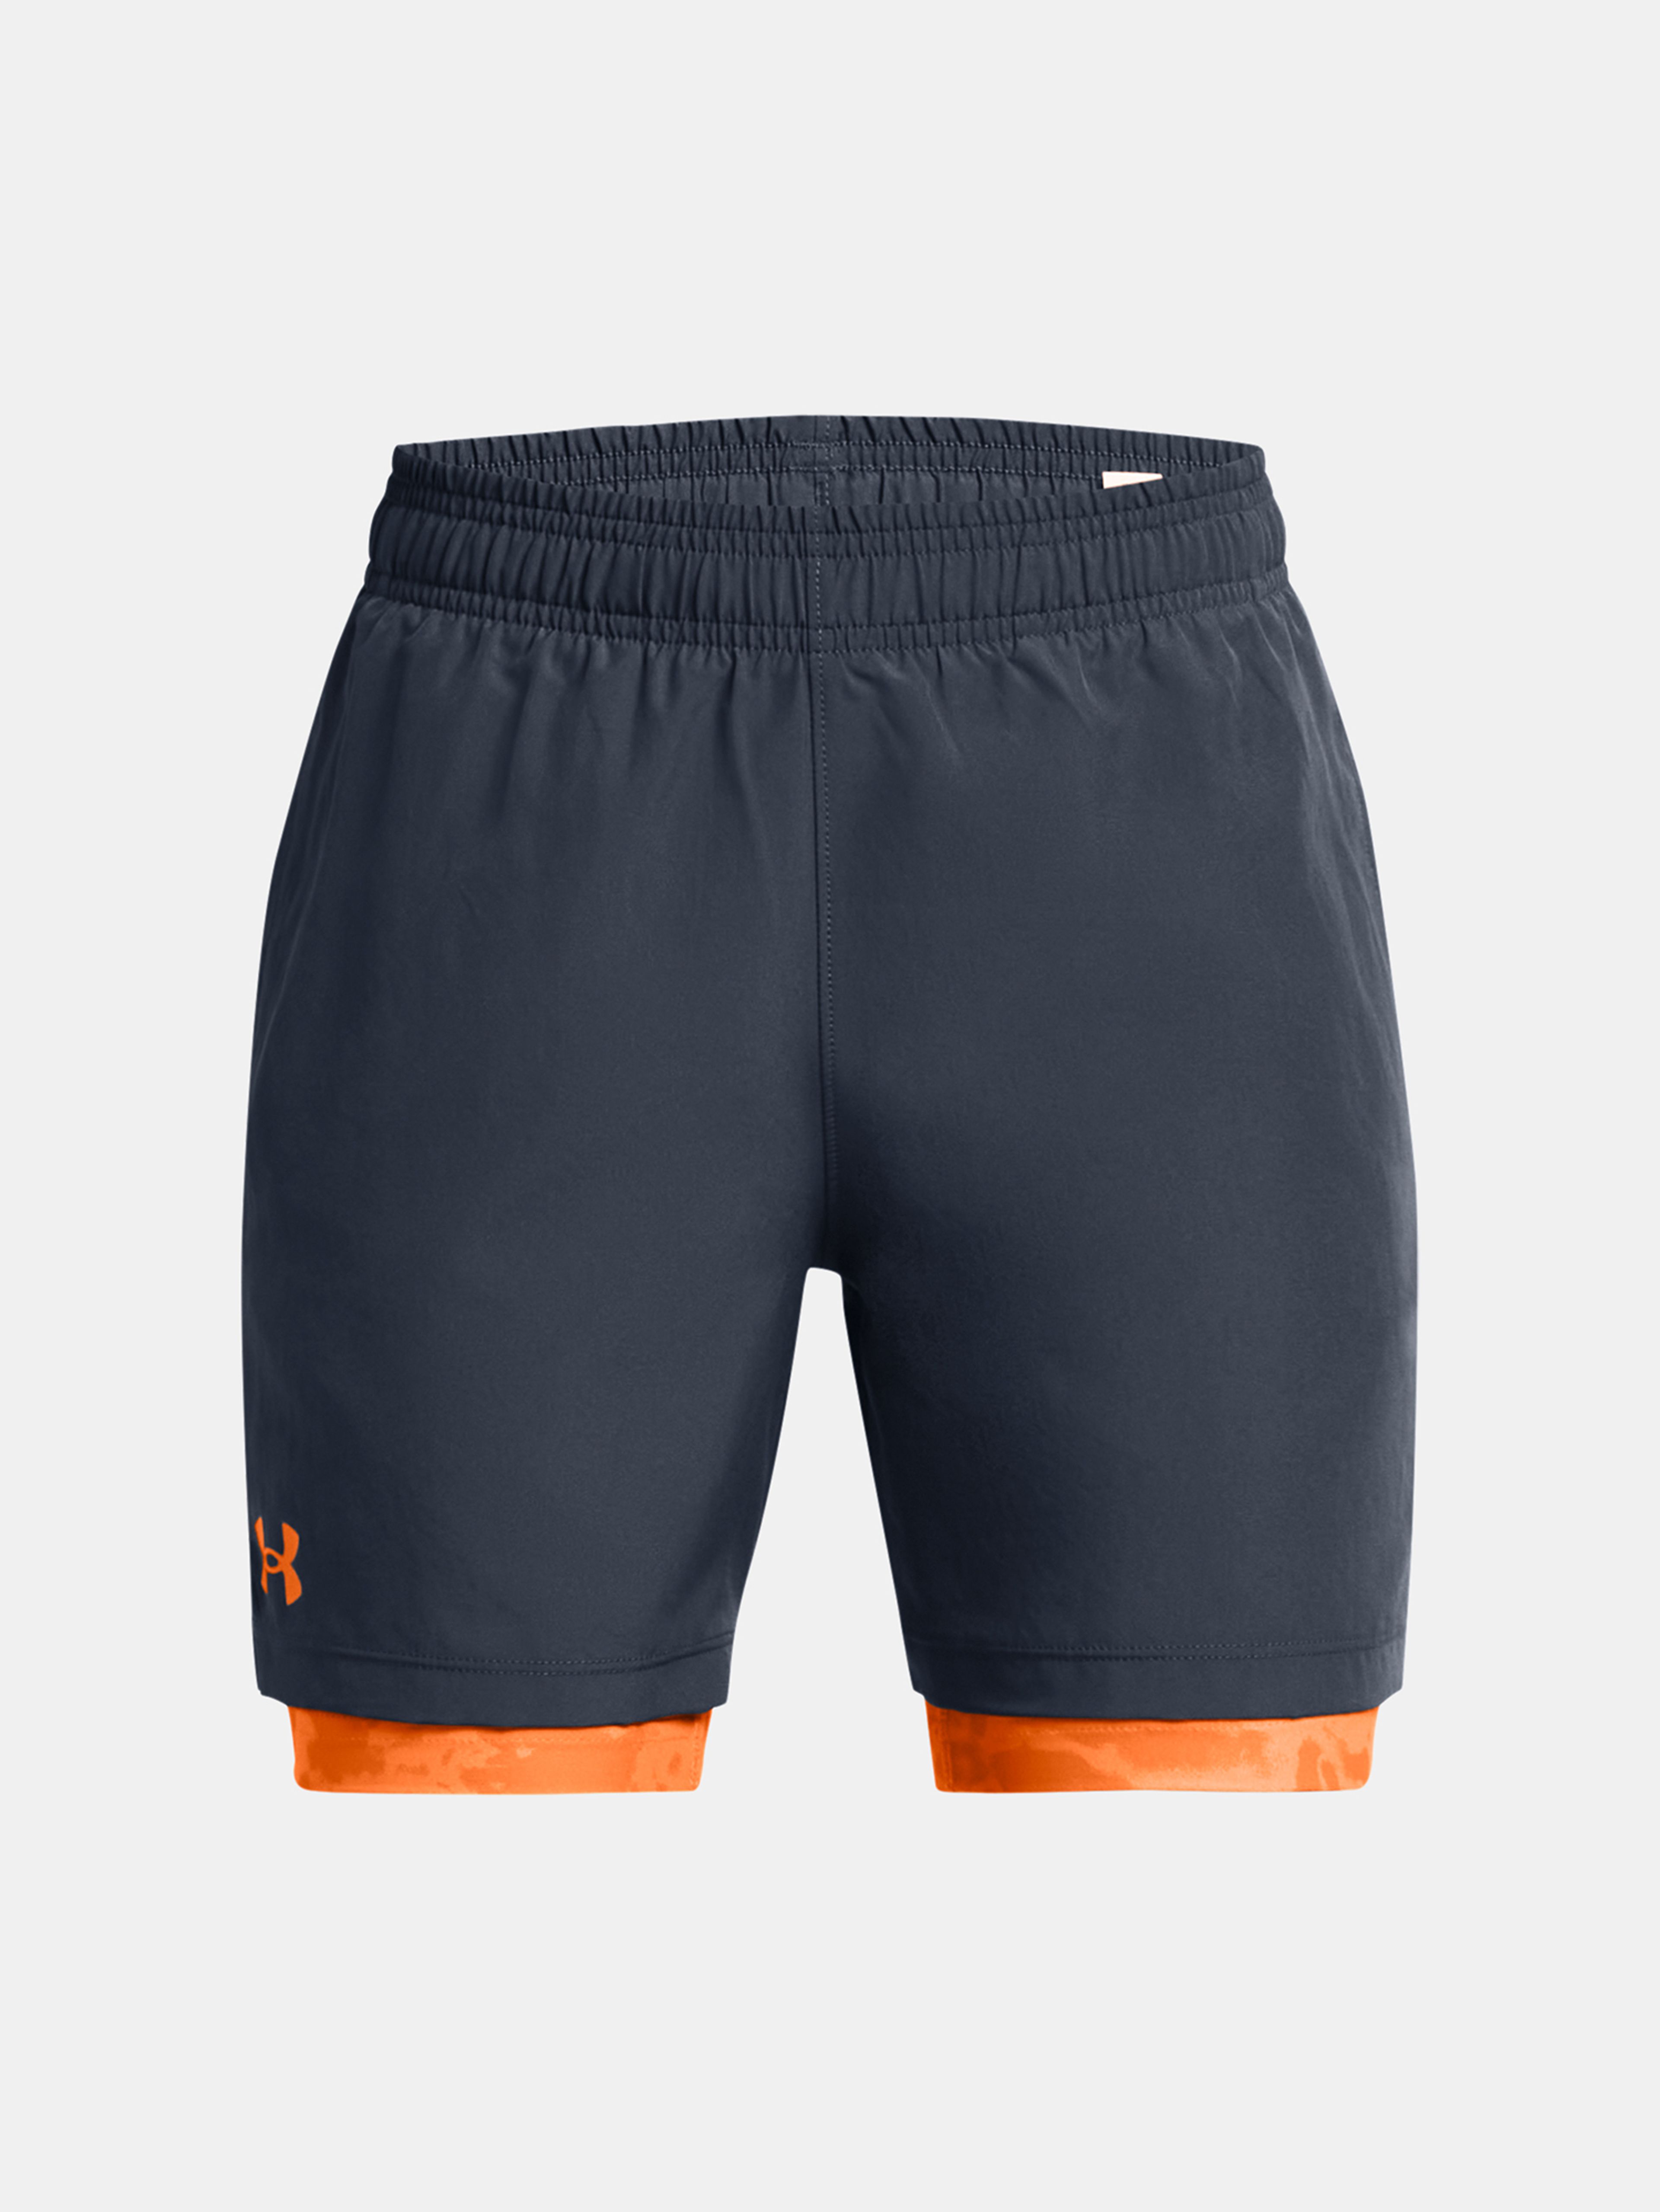 Kraťasy Under Armour UA Woven 2in1 Shorts-GRY